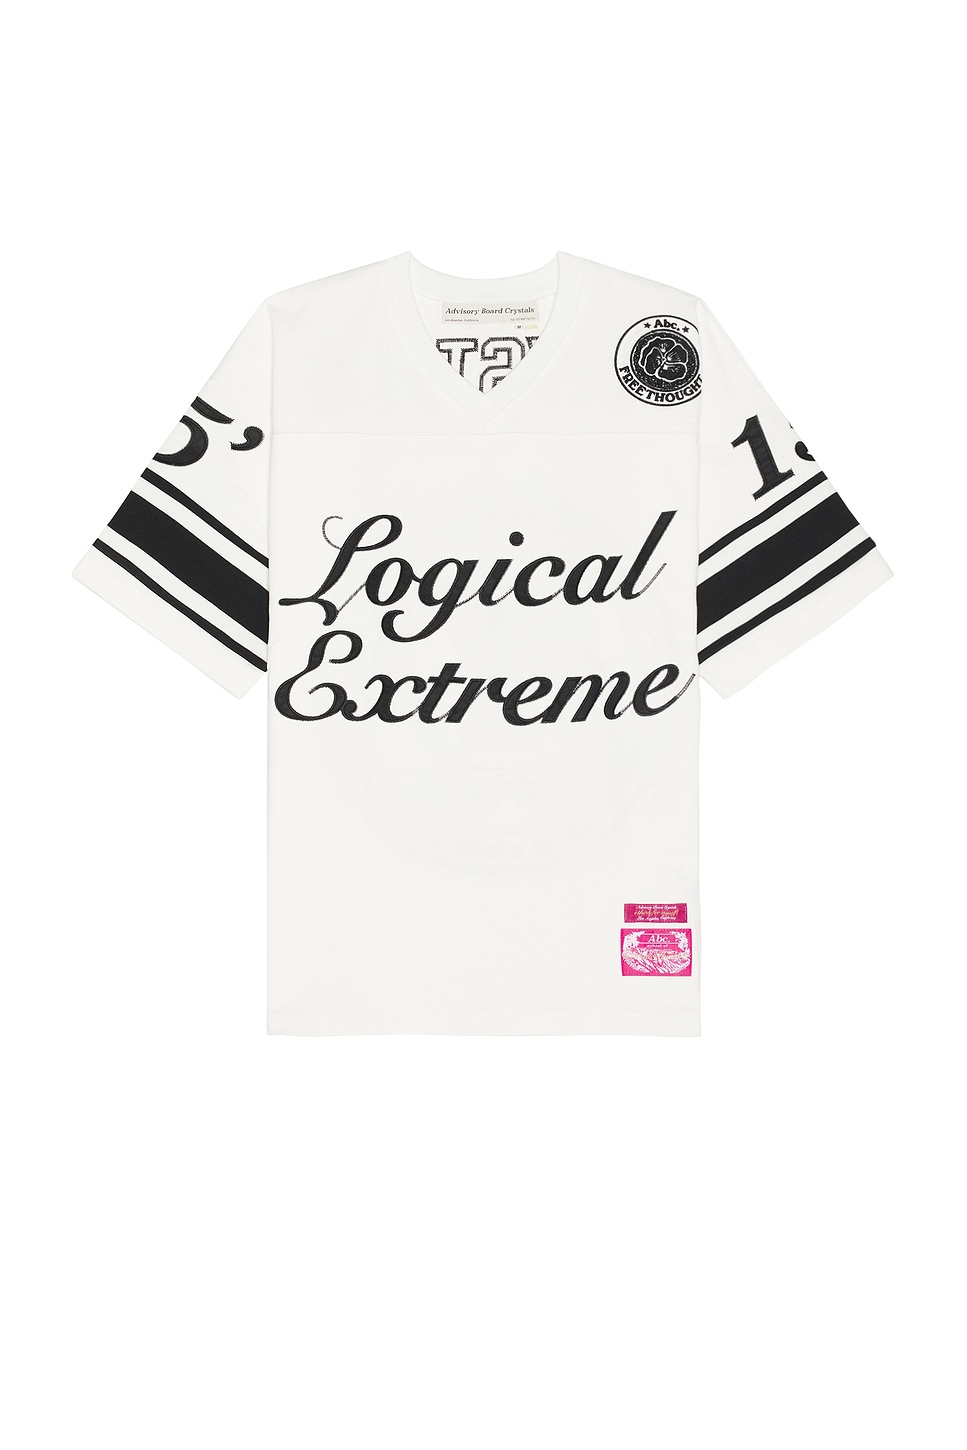 Logical Extreme Rugby Shirt in White